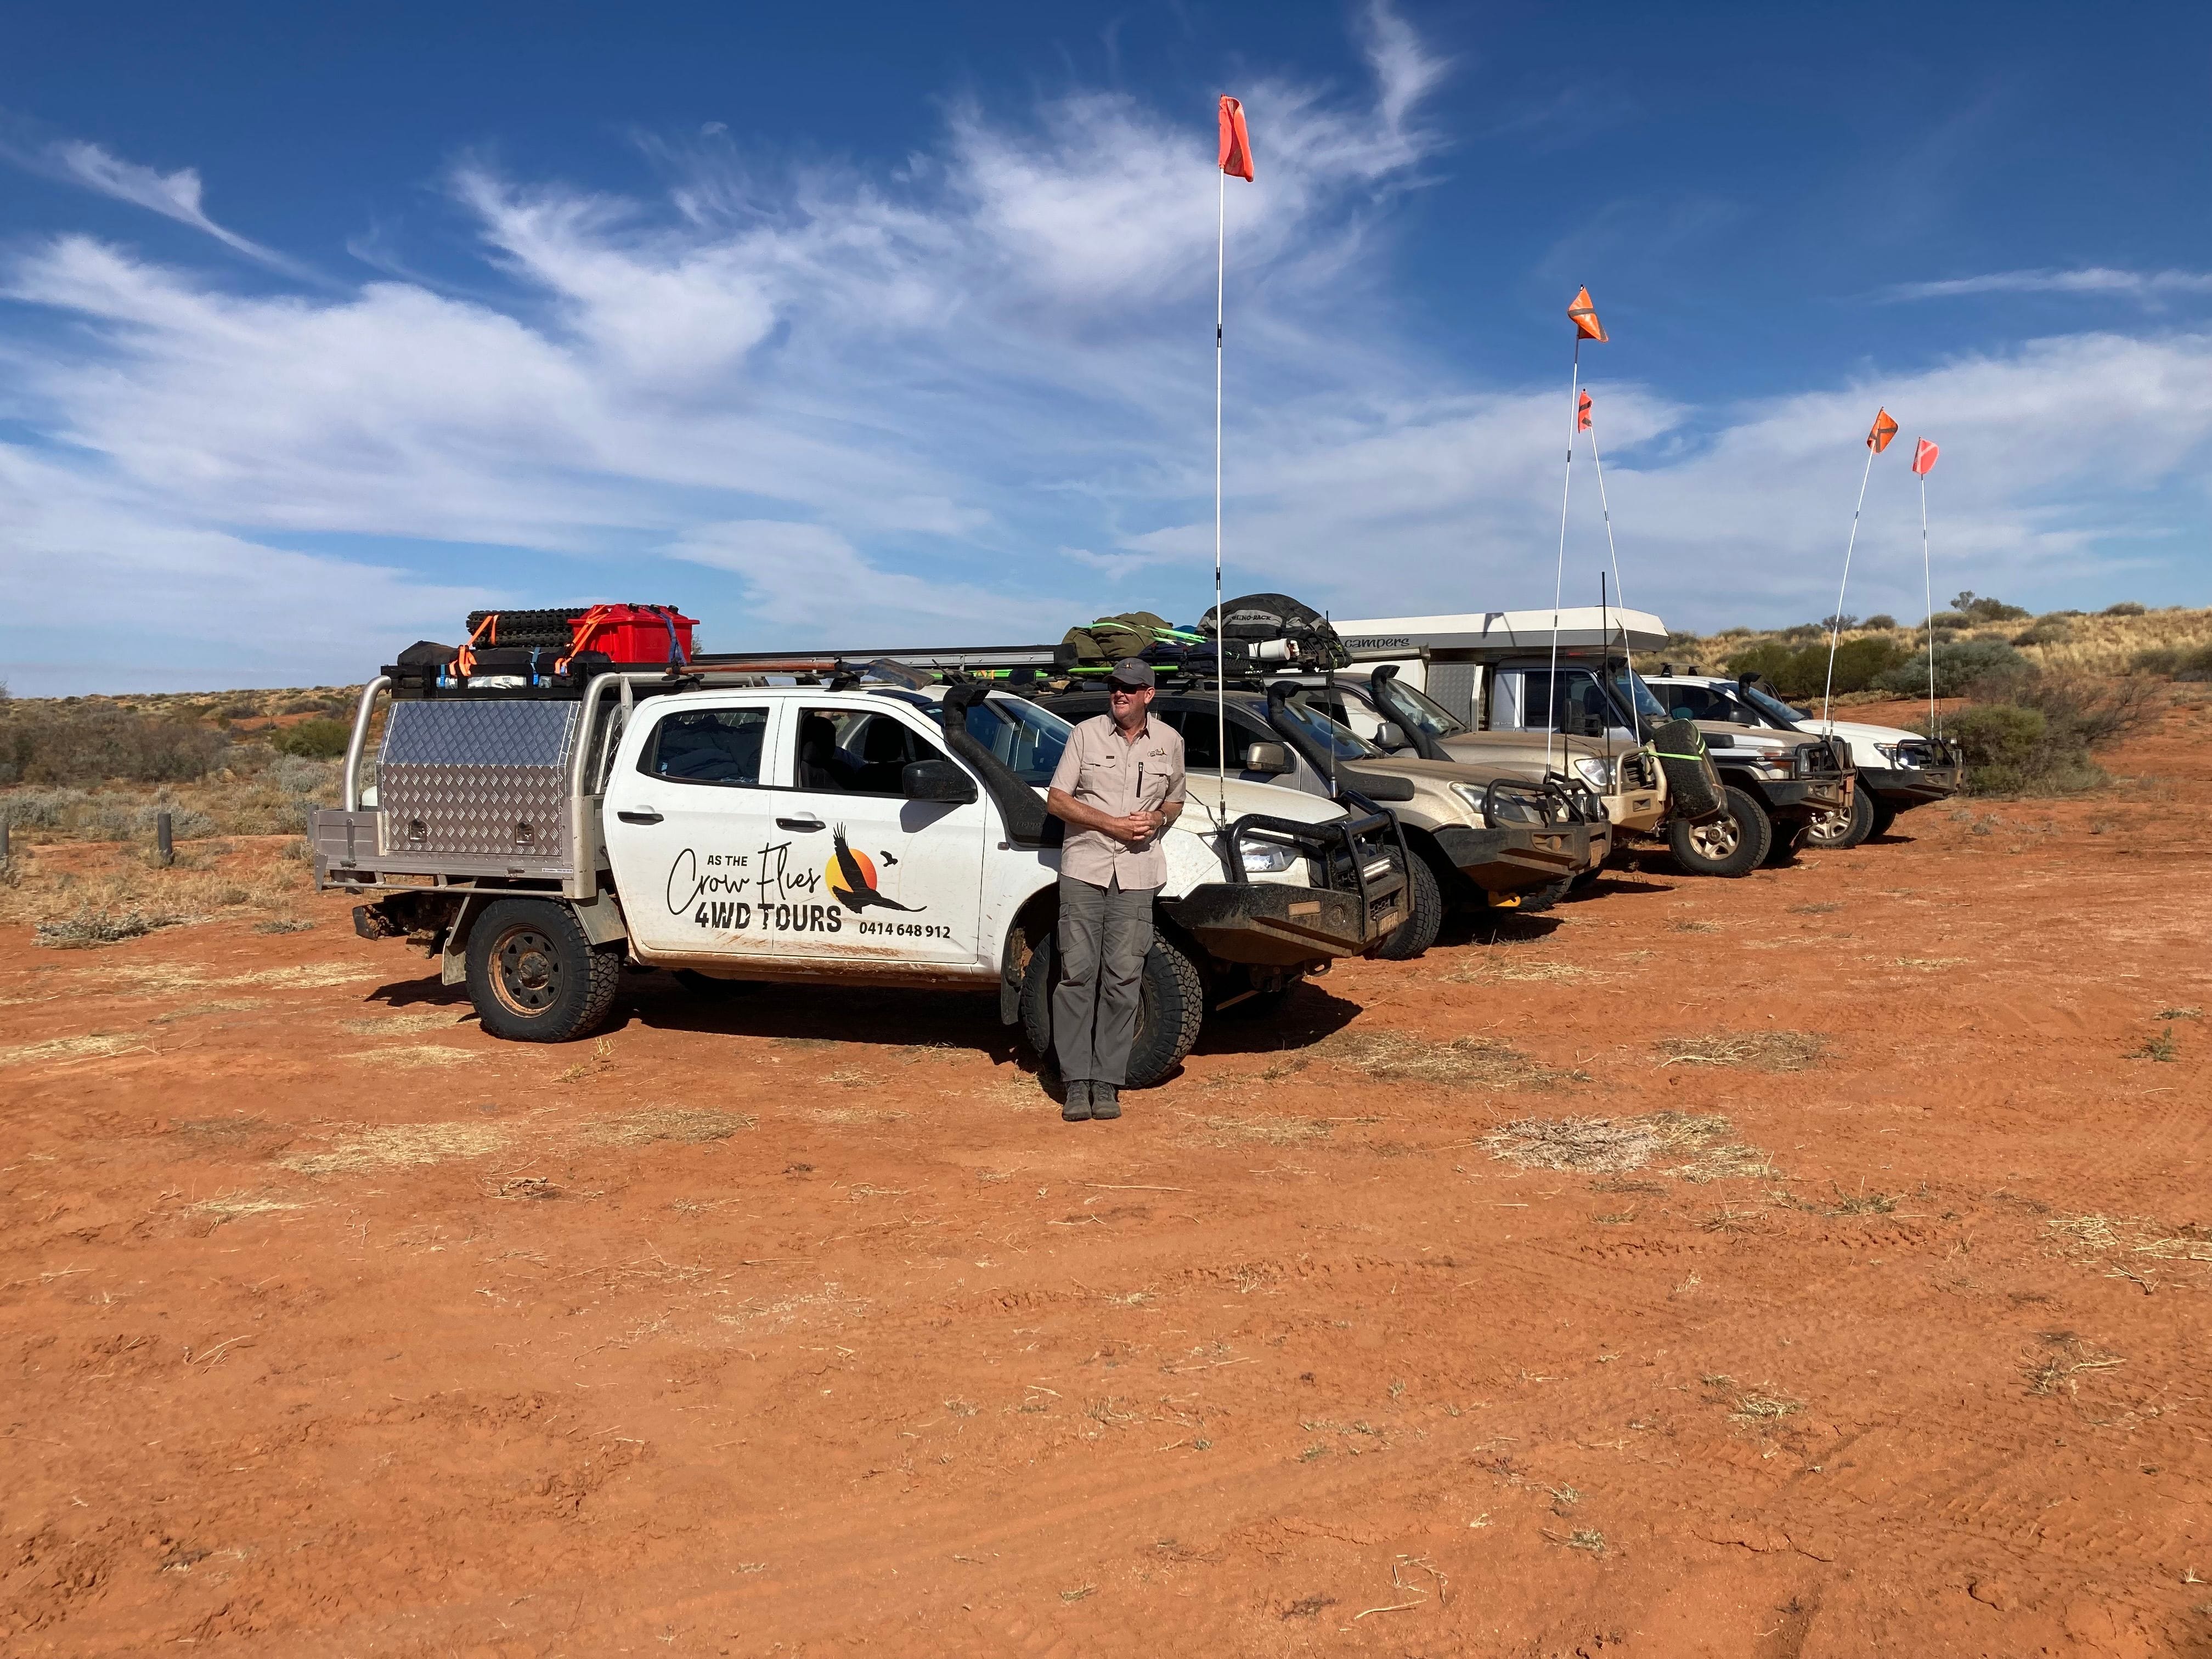 Matthew Crow, Owner operator of "As the Crow Flies 4wd Tours"